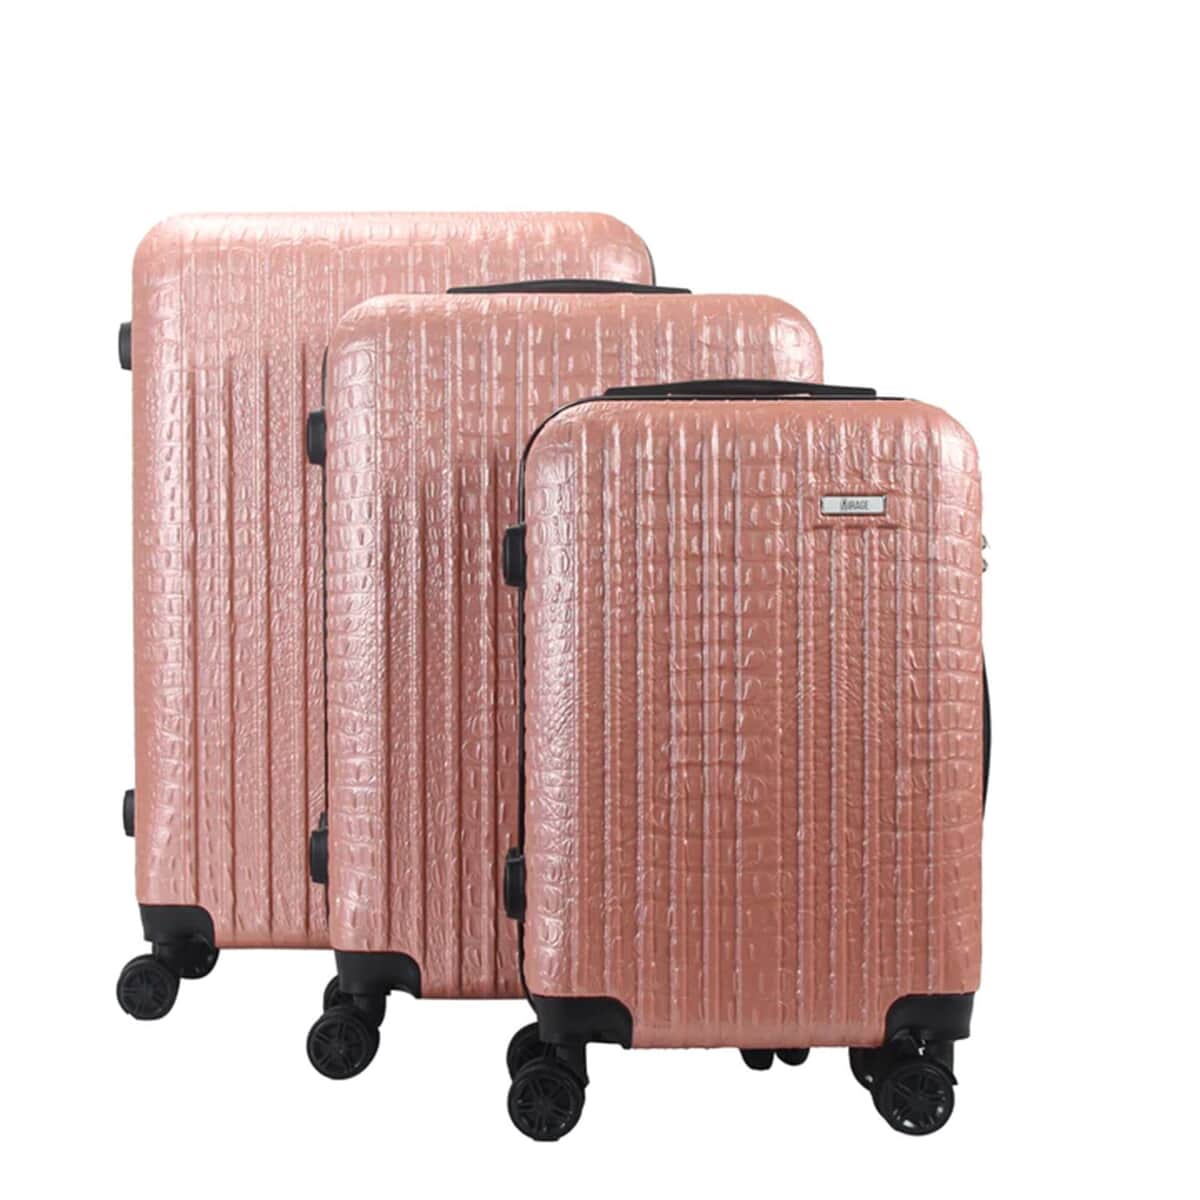 Mirage- Eileen 3 Piece Rose Gold Crocodile Embossed Luggage Set with Dual Spinning Wheels and Combo Lock (28, 24, 20) image number 6